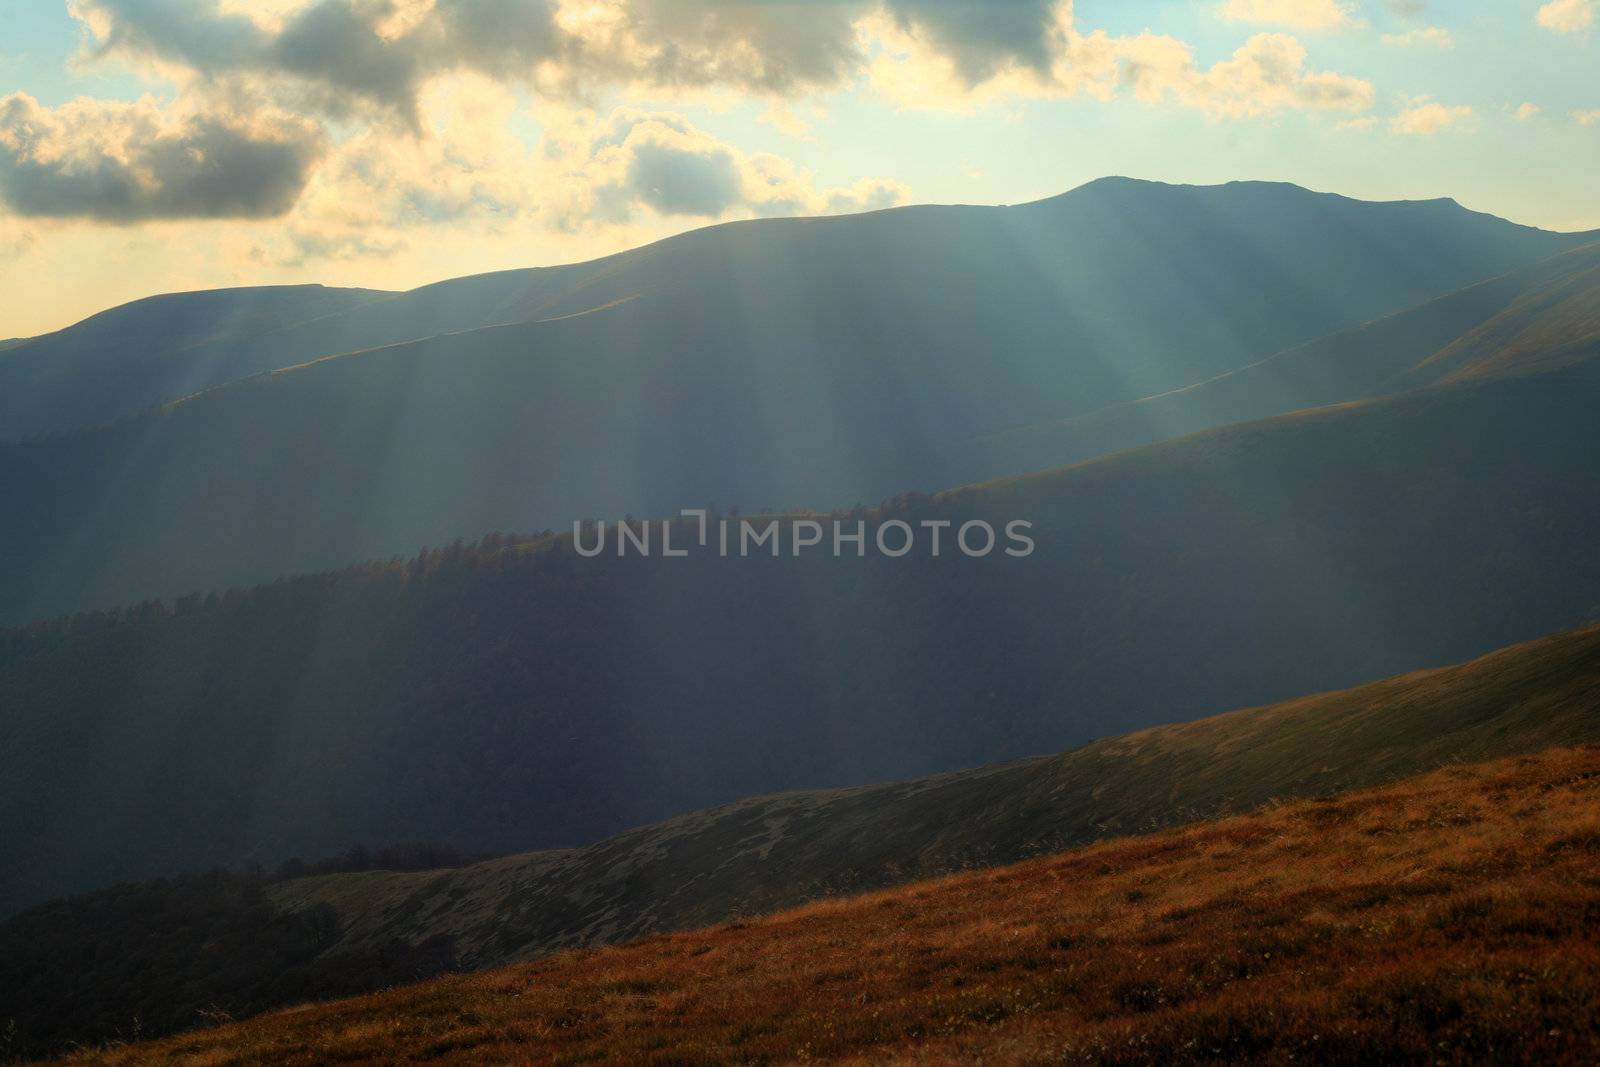 An image of sun ray in mountain